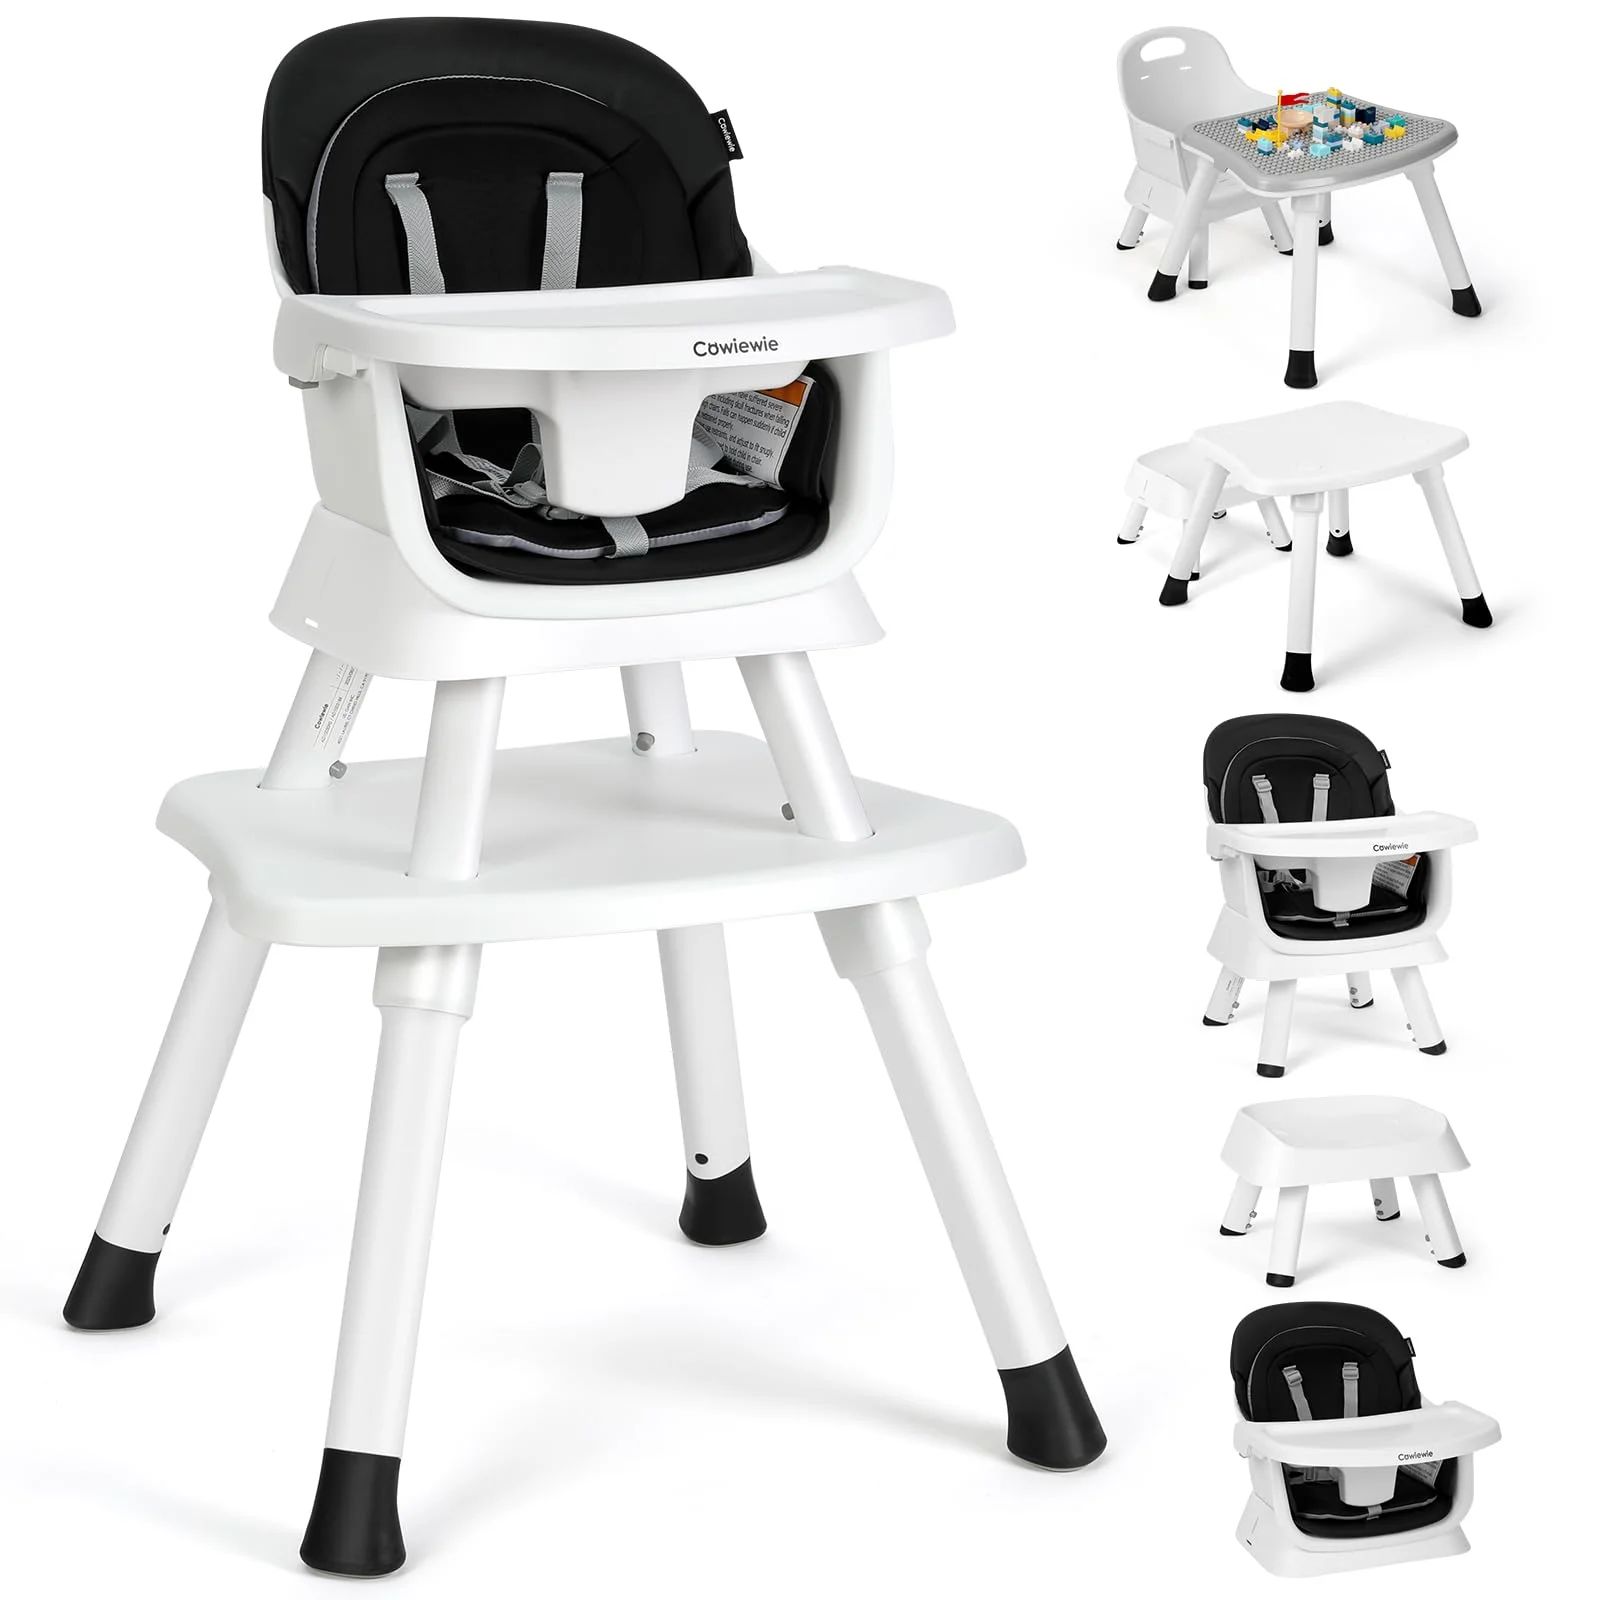 Cowiewie 8 in 1 Baby High Chair for Babies, Toddler Dining Booster Seat, BPA Free PP Material, Bl... | Walmart (US)